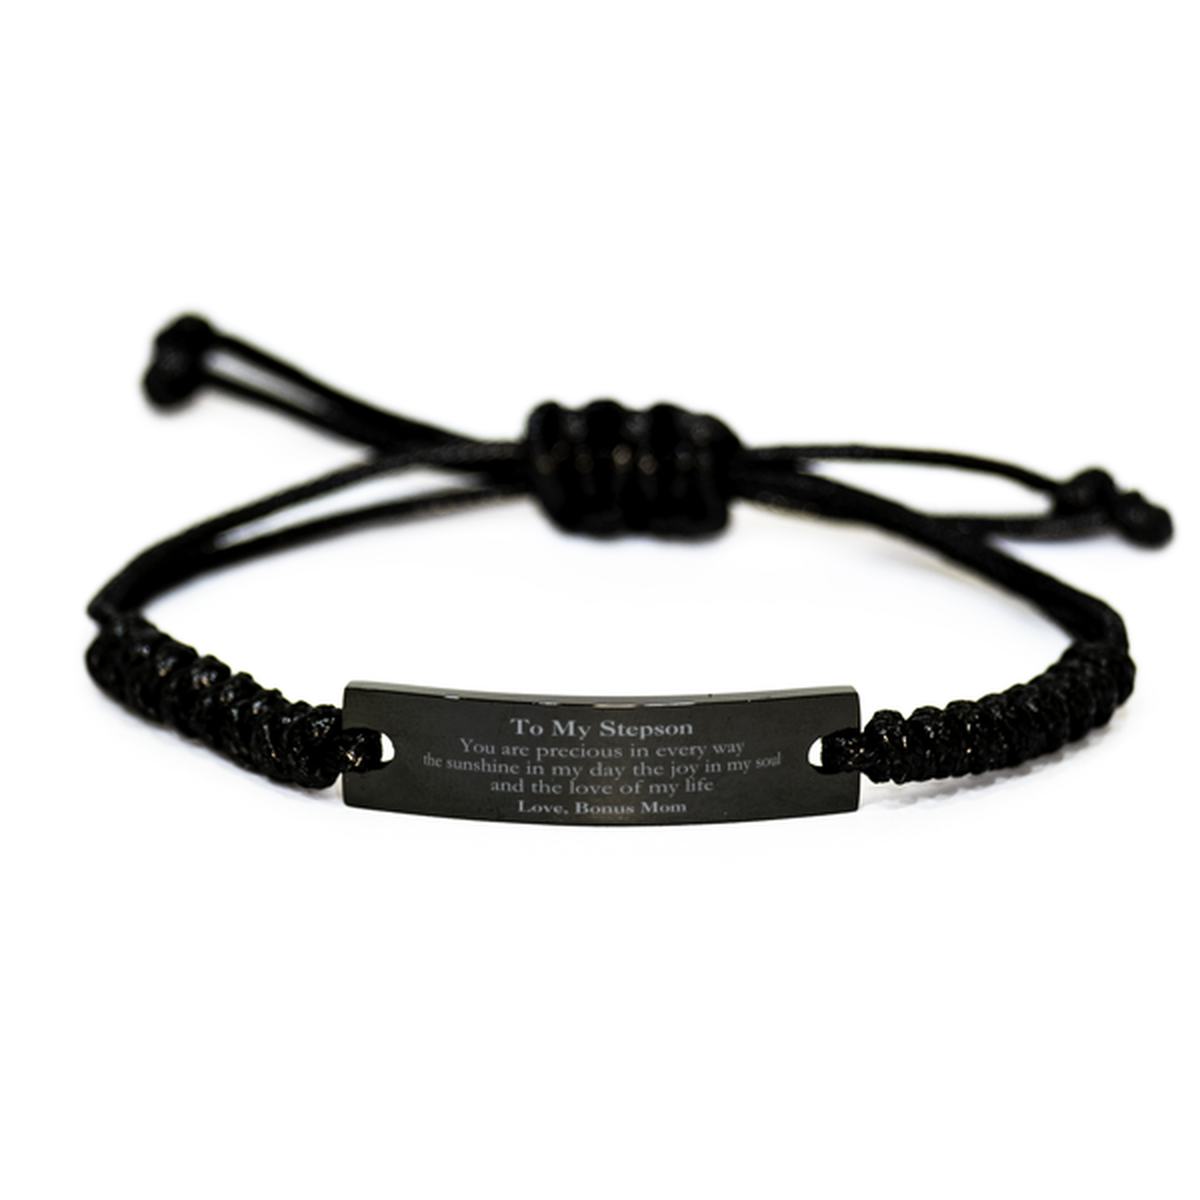 Graduation Gifts for Stepson Black Rope Bracelet Present from Bonus Mom, Christmas Stepson Birthday Gifts Stepson You are precious in every way the sunshine in my day. Love, Bonus Mom